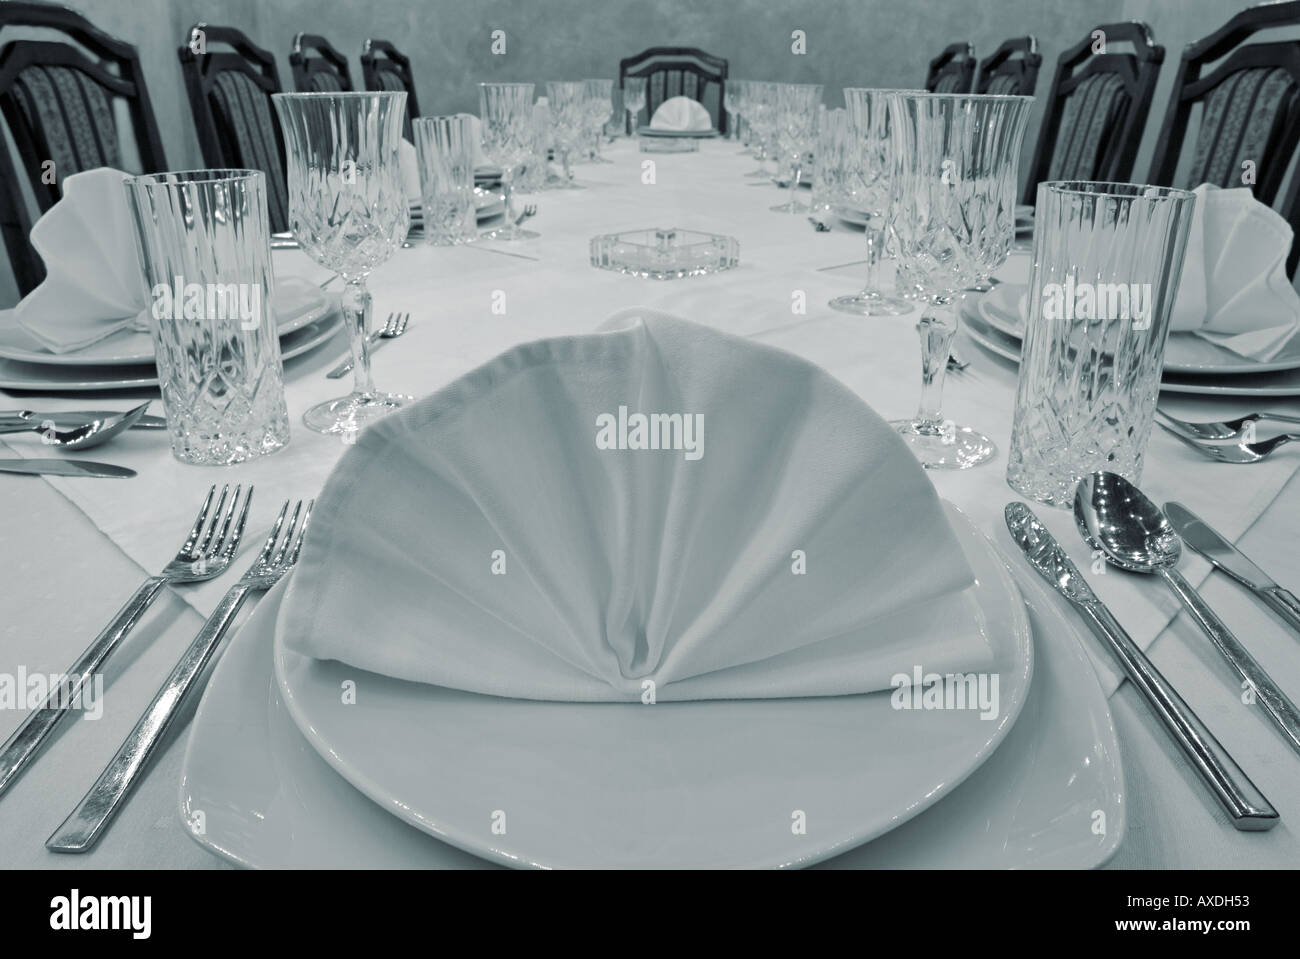 Place settings on a Dining Table Stock Photo